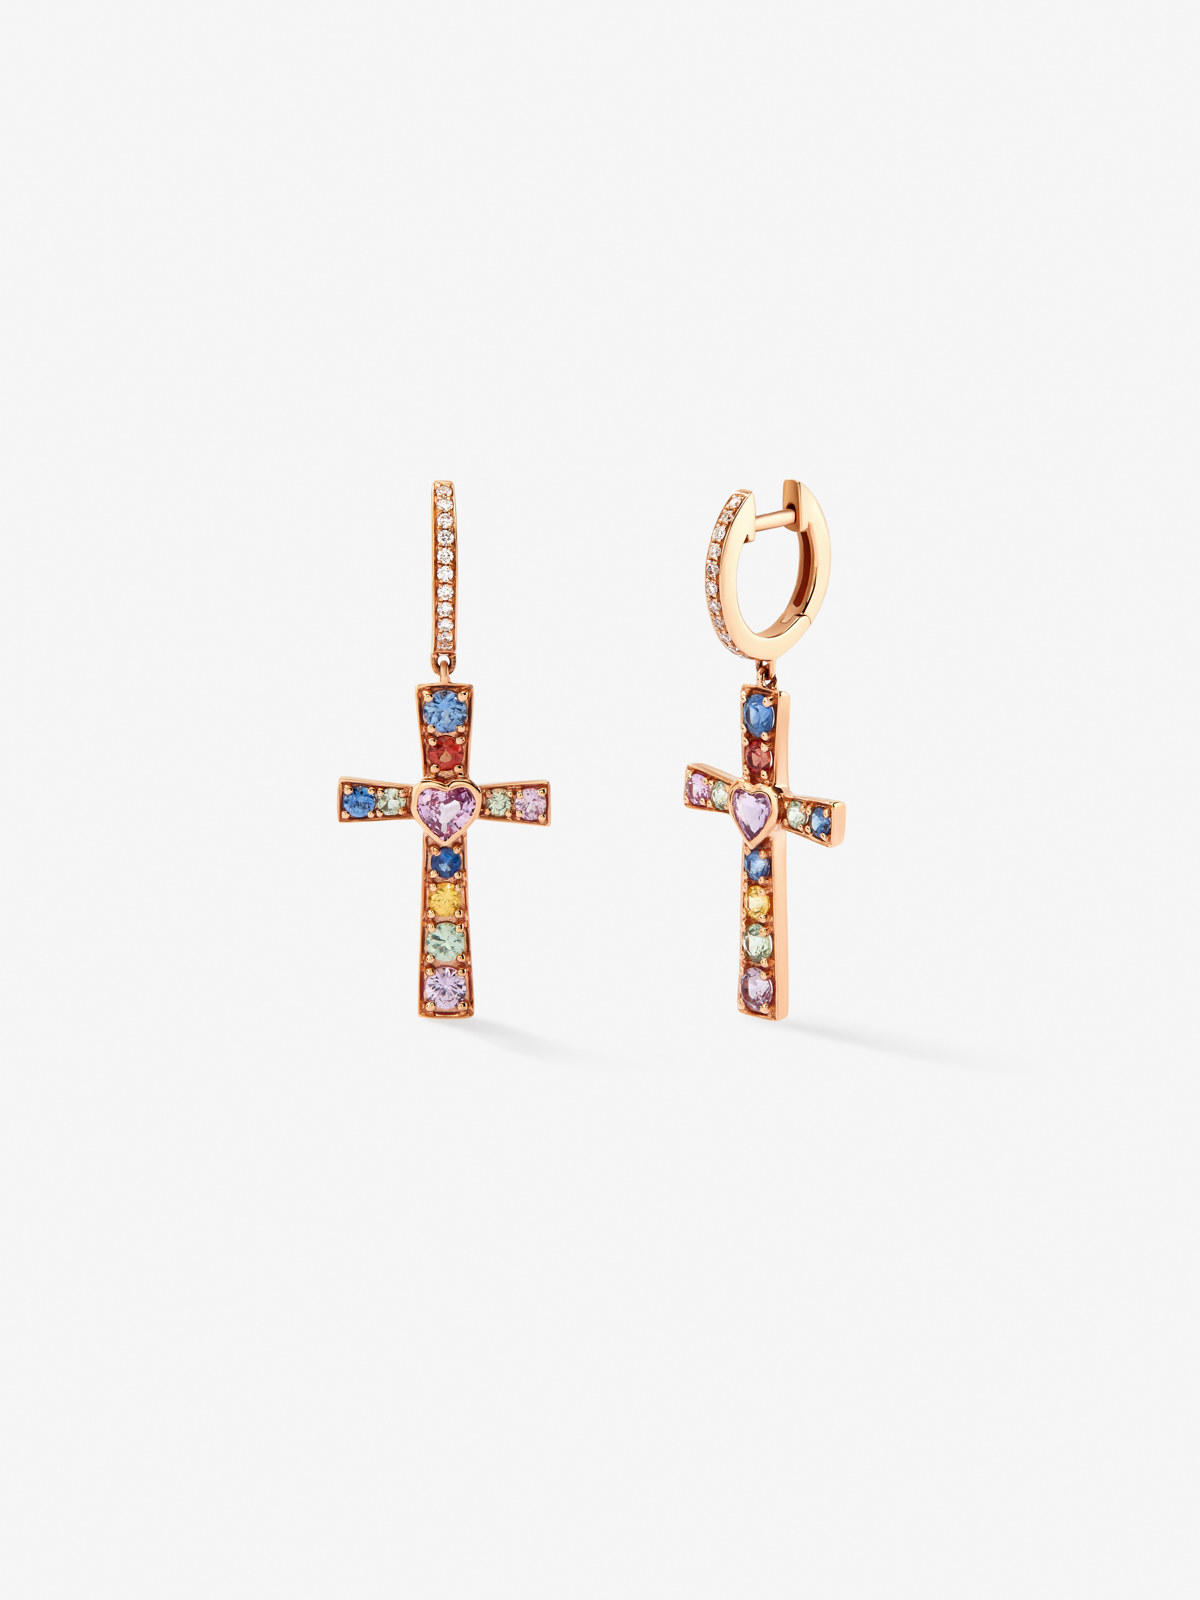 18kt rose gold earrings with multicolored sapphires